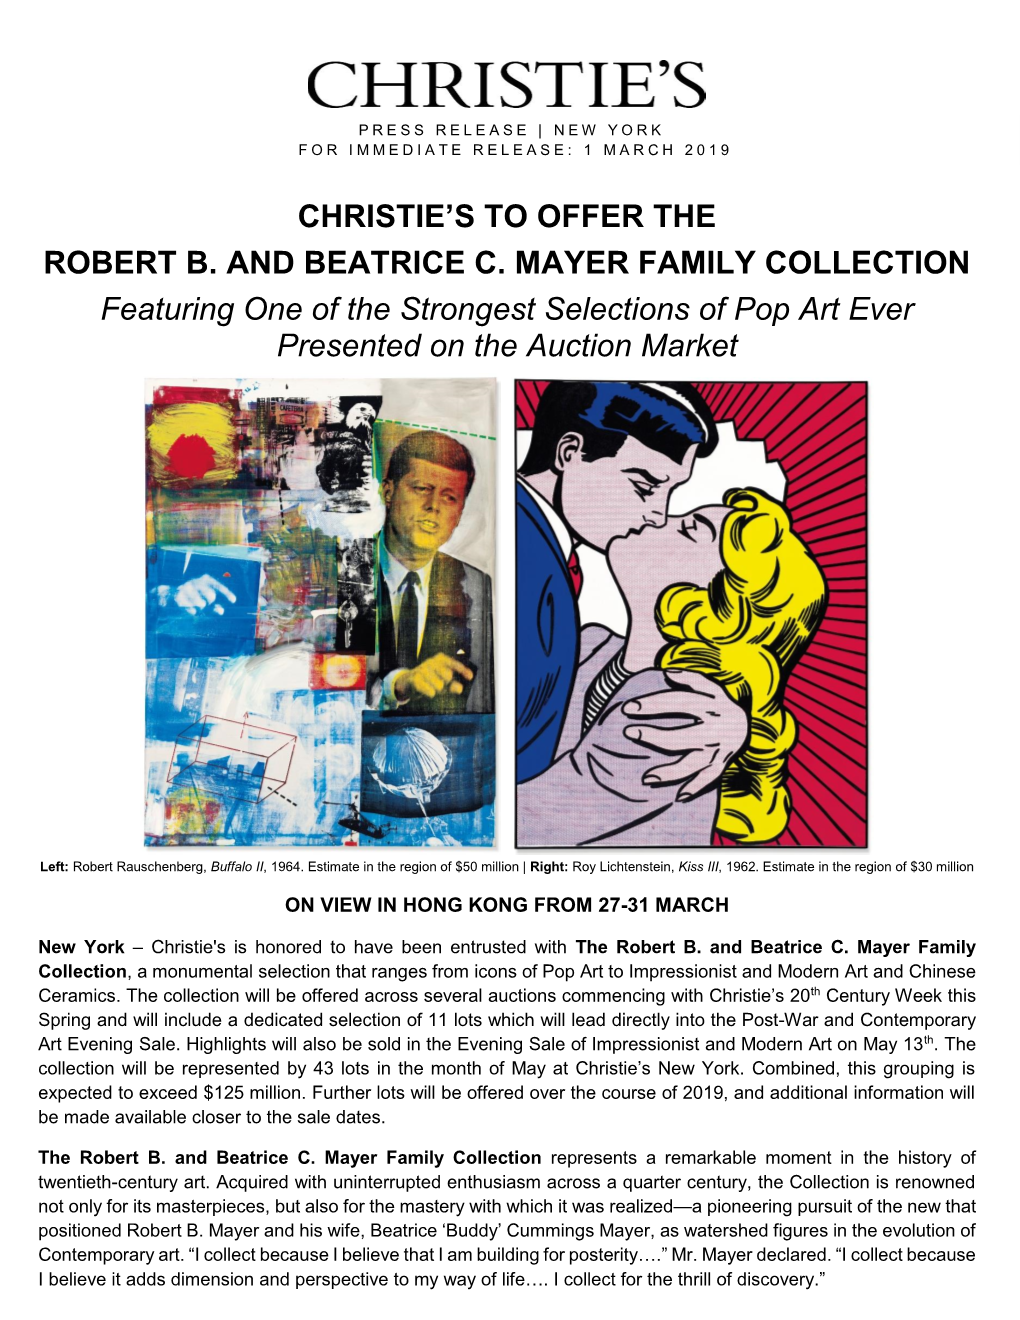 CHRISTIE's to OFFER the ROBERT B. and BEATRICE C. MAYER FAMILY COLLECTION Featuring One of the Strongest Selections of Pop Ar